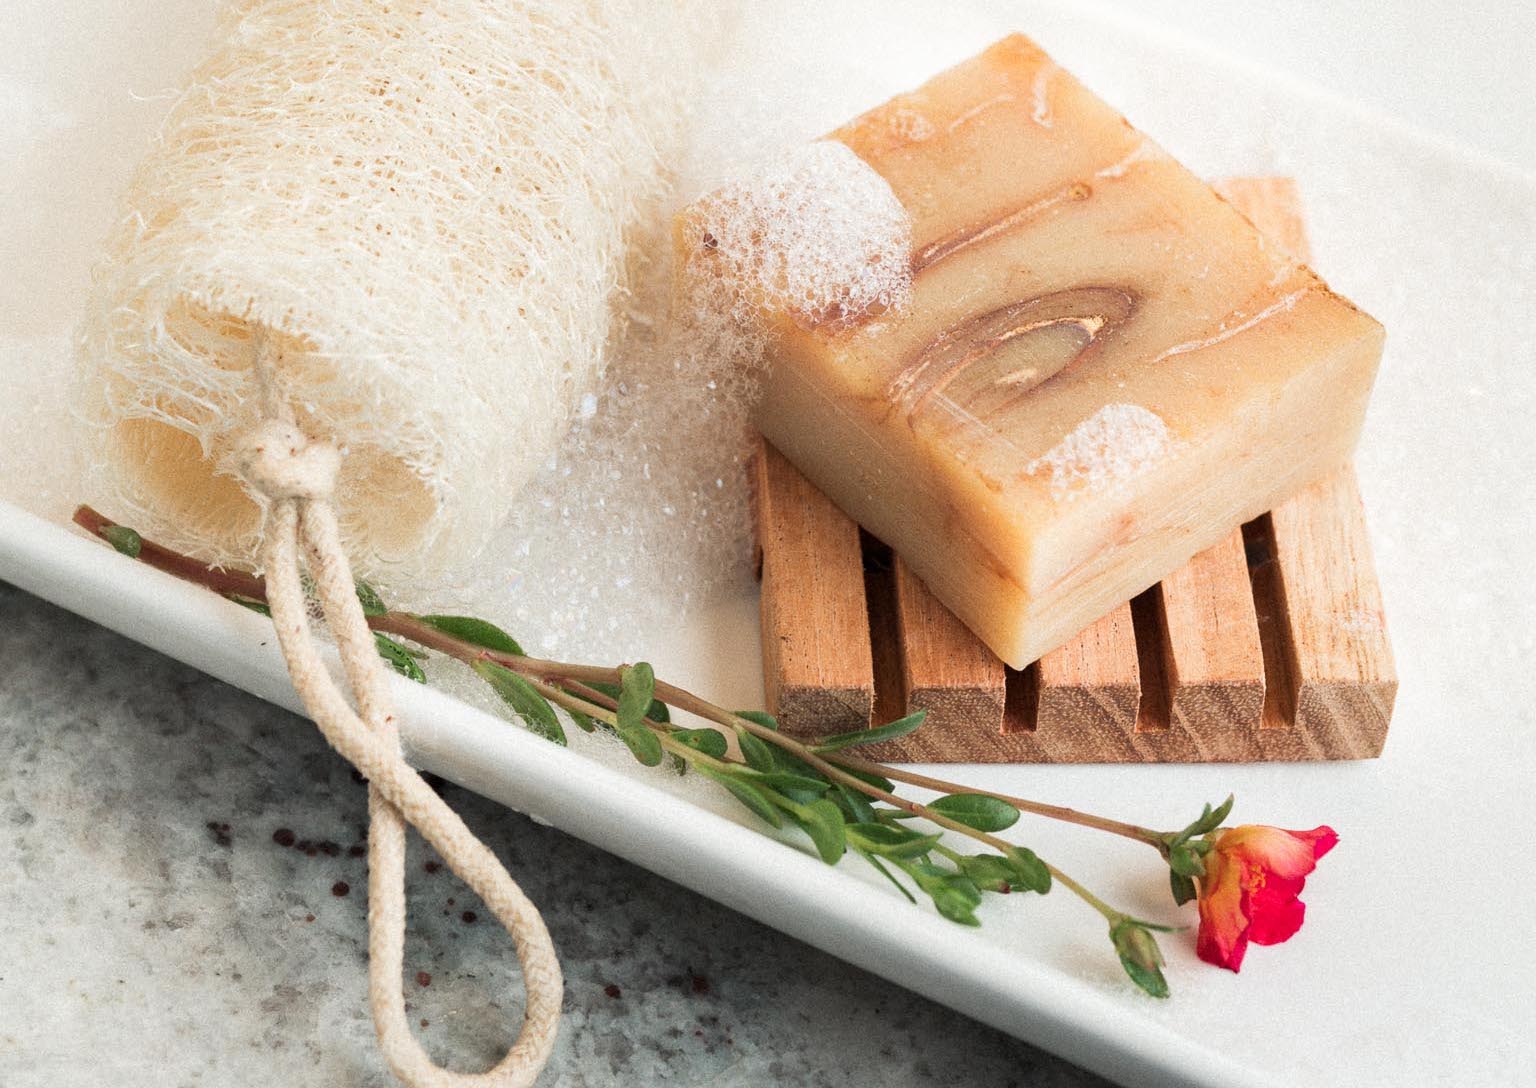 Sip and Spa with Natural Vegetable Soaps from India